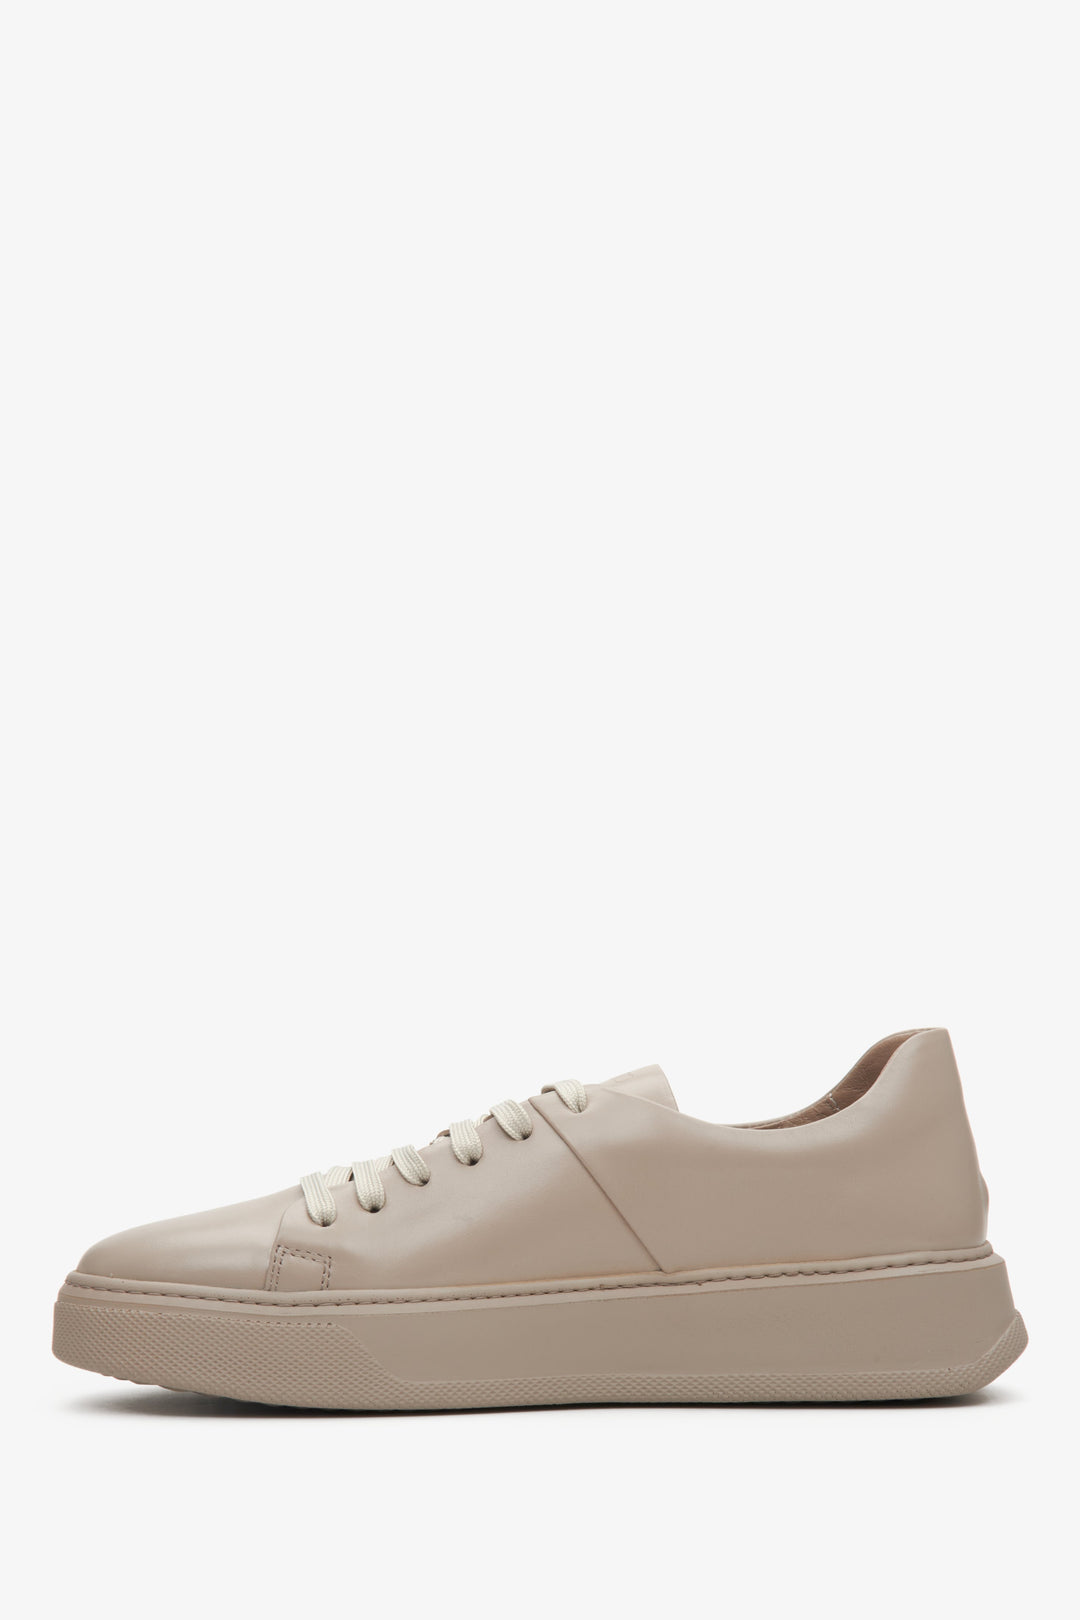 Women's beige sneakers made of genuine leather by Estro - shoe profile.